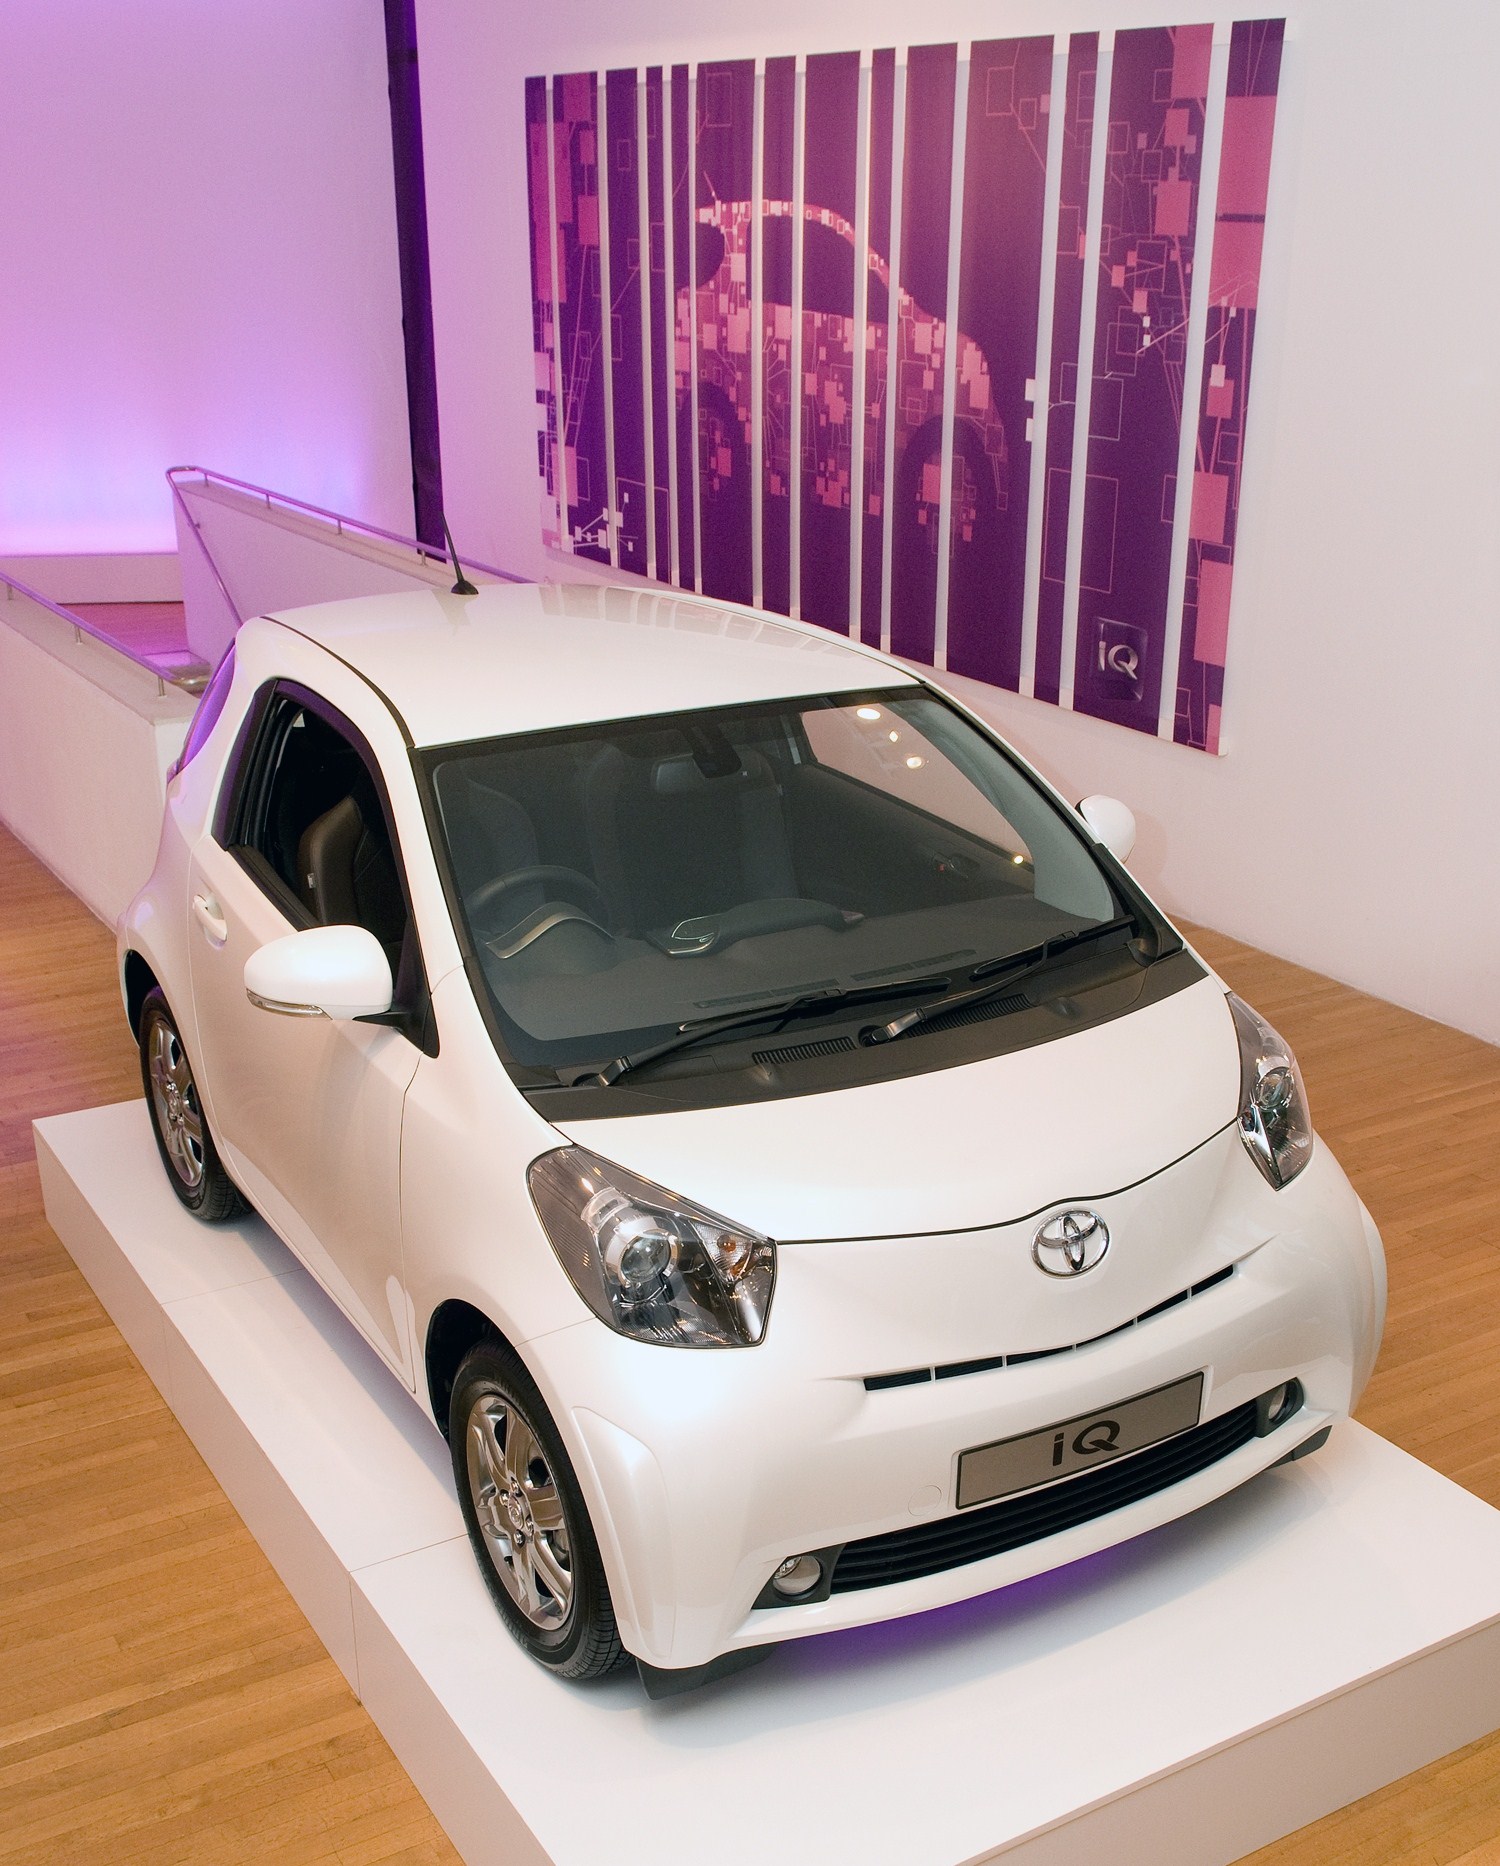 Toyota iQ exhibition at the Royal College of Art